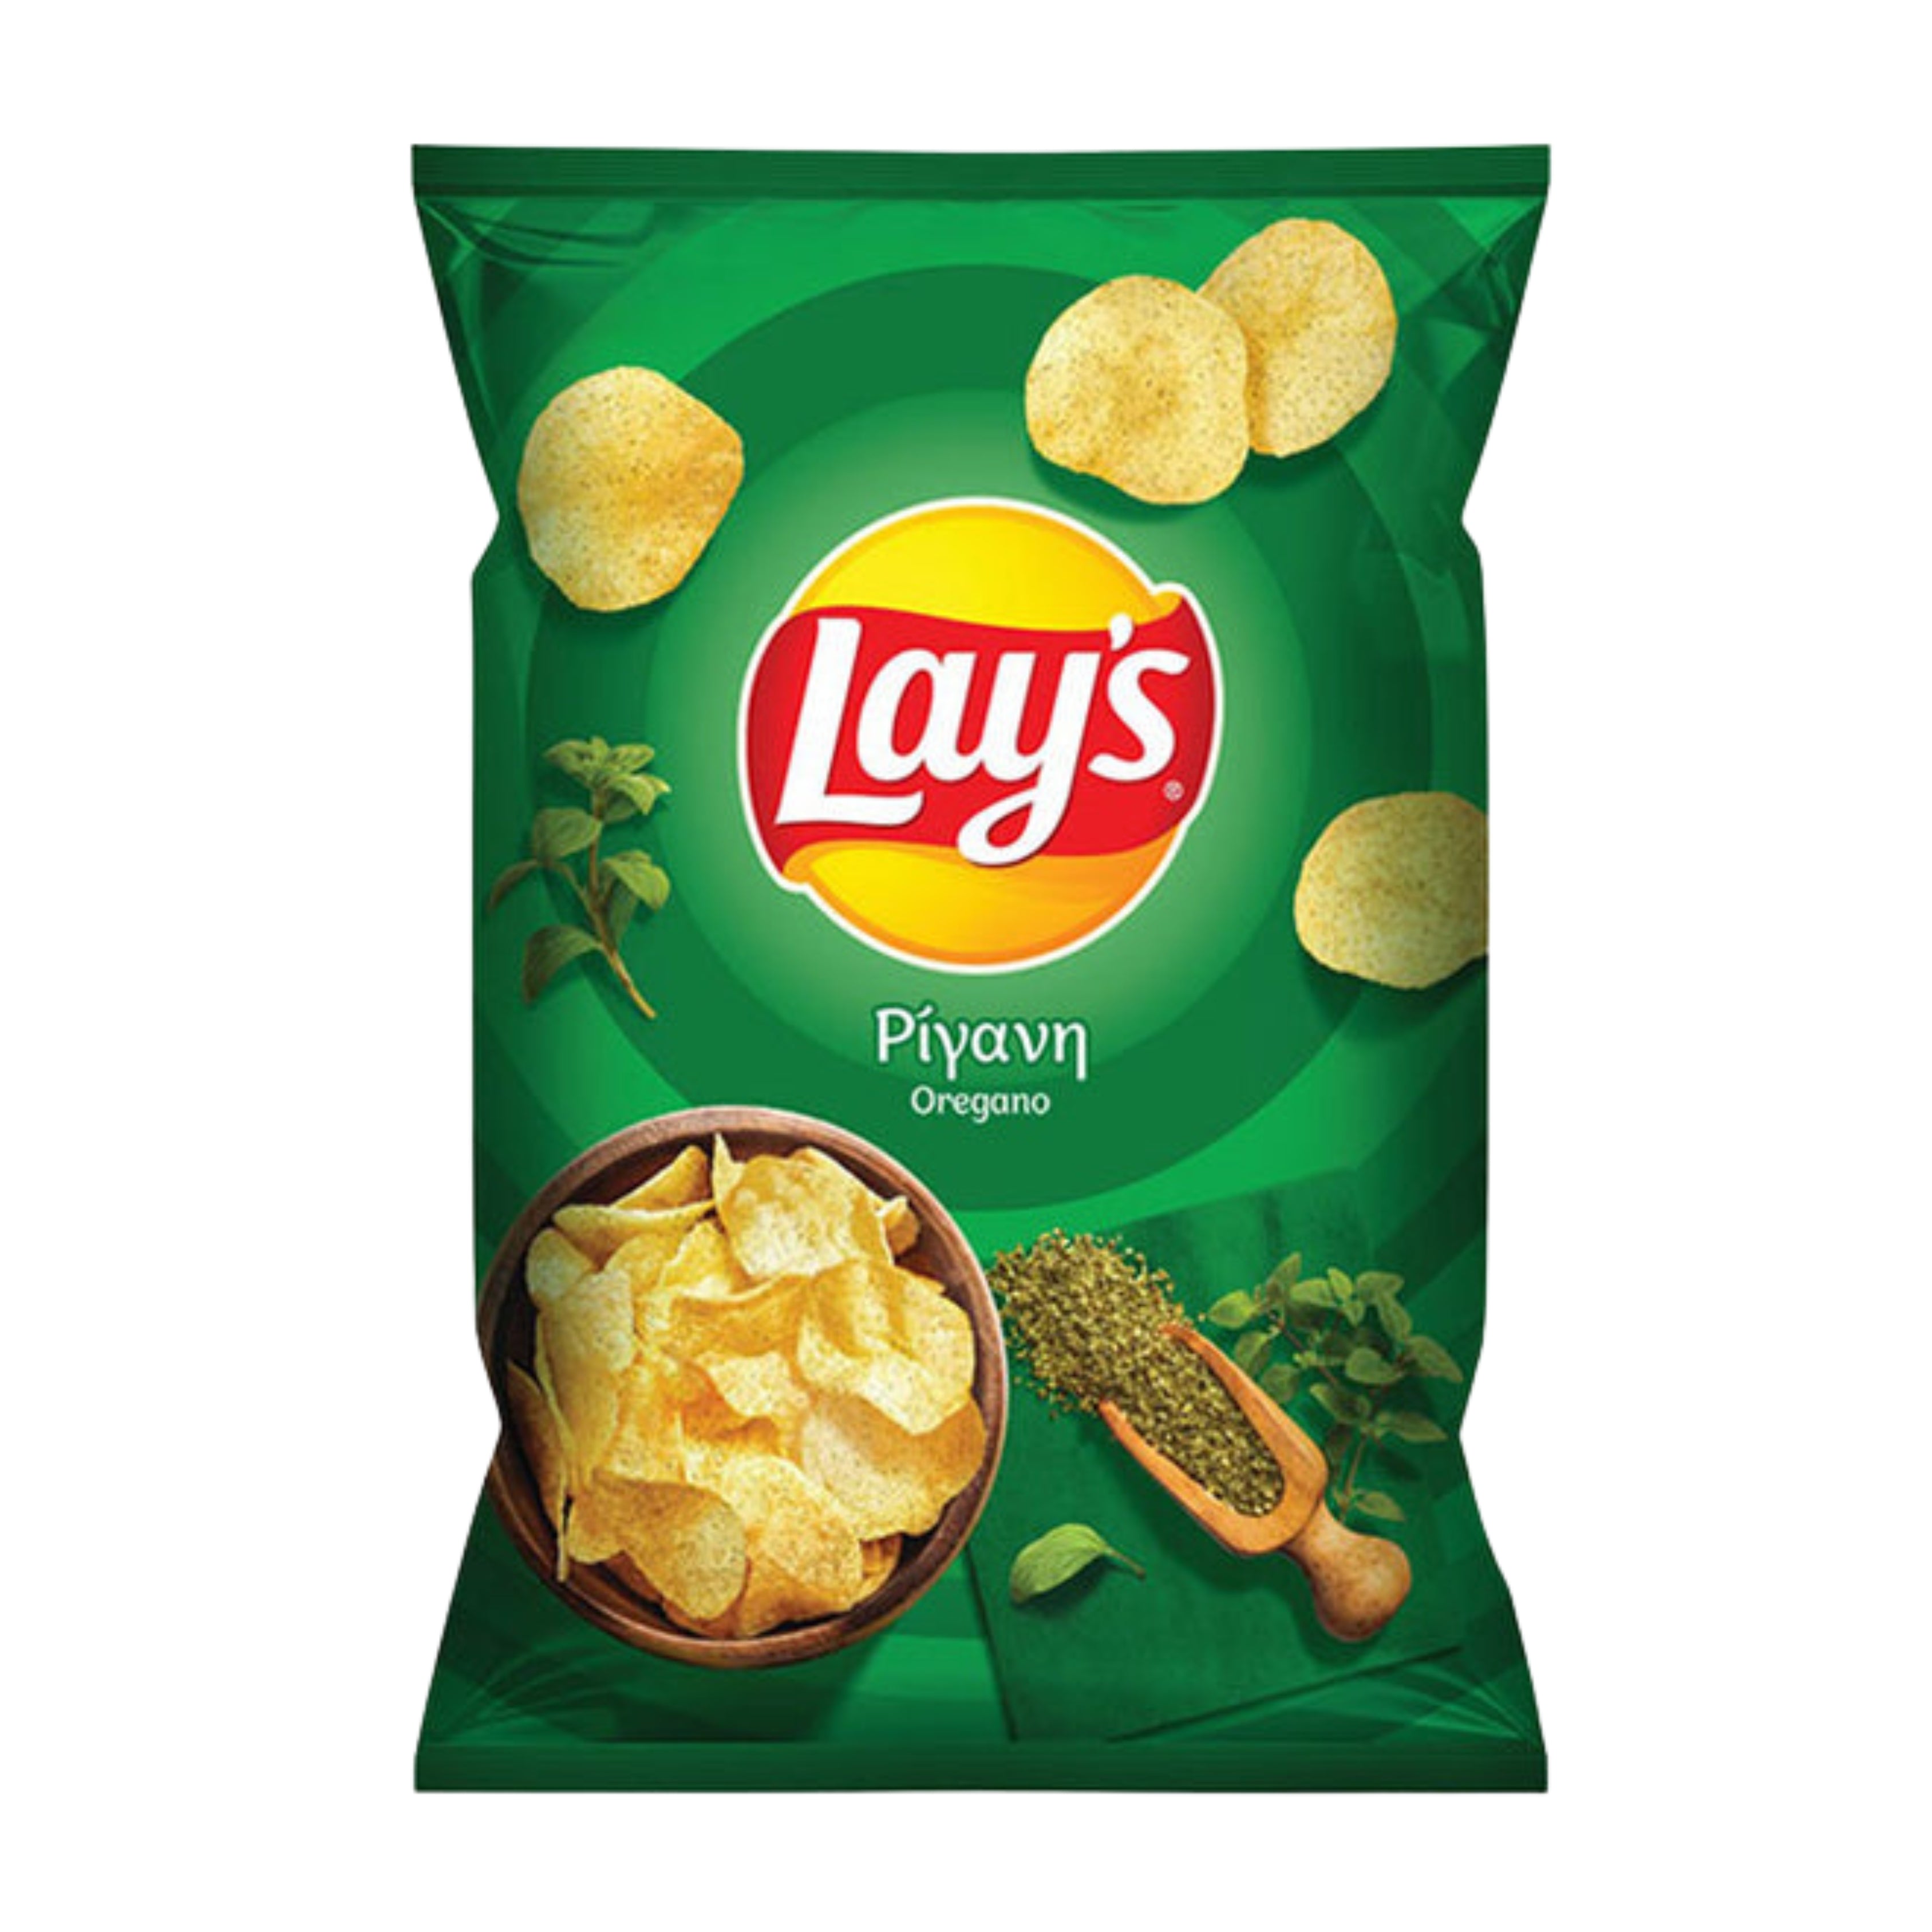 Lays Chips with oregano - 150g